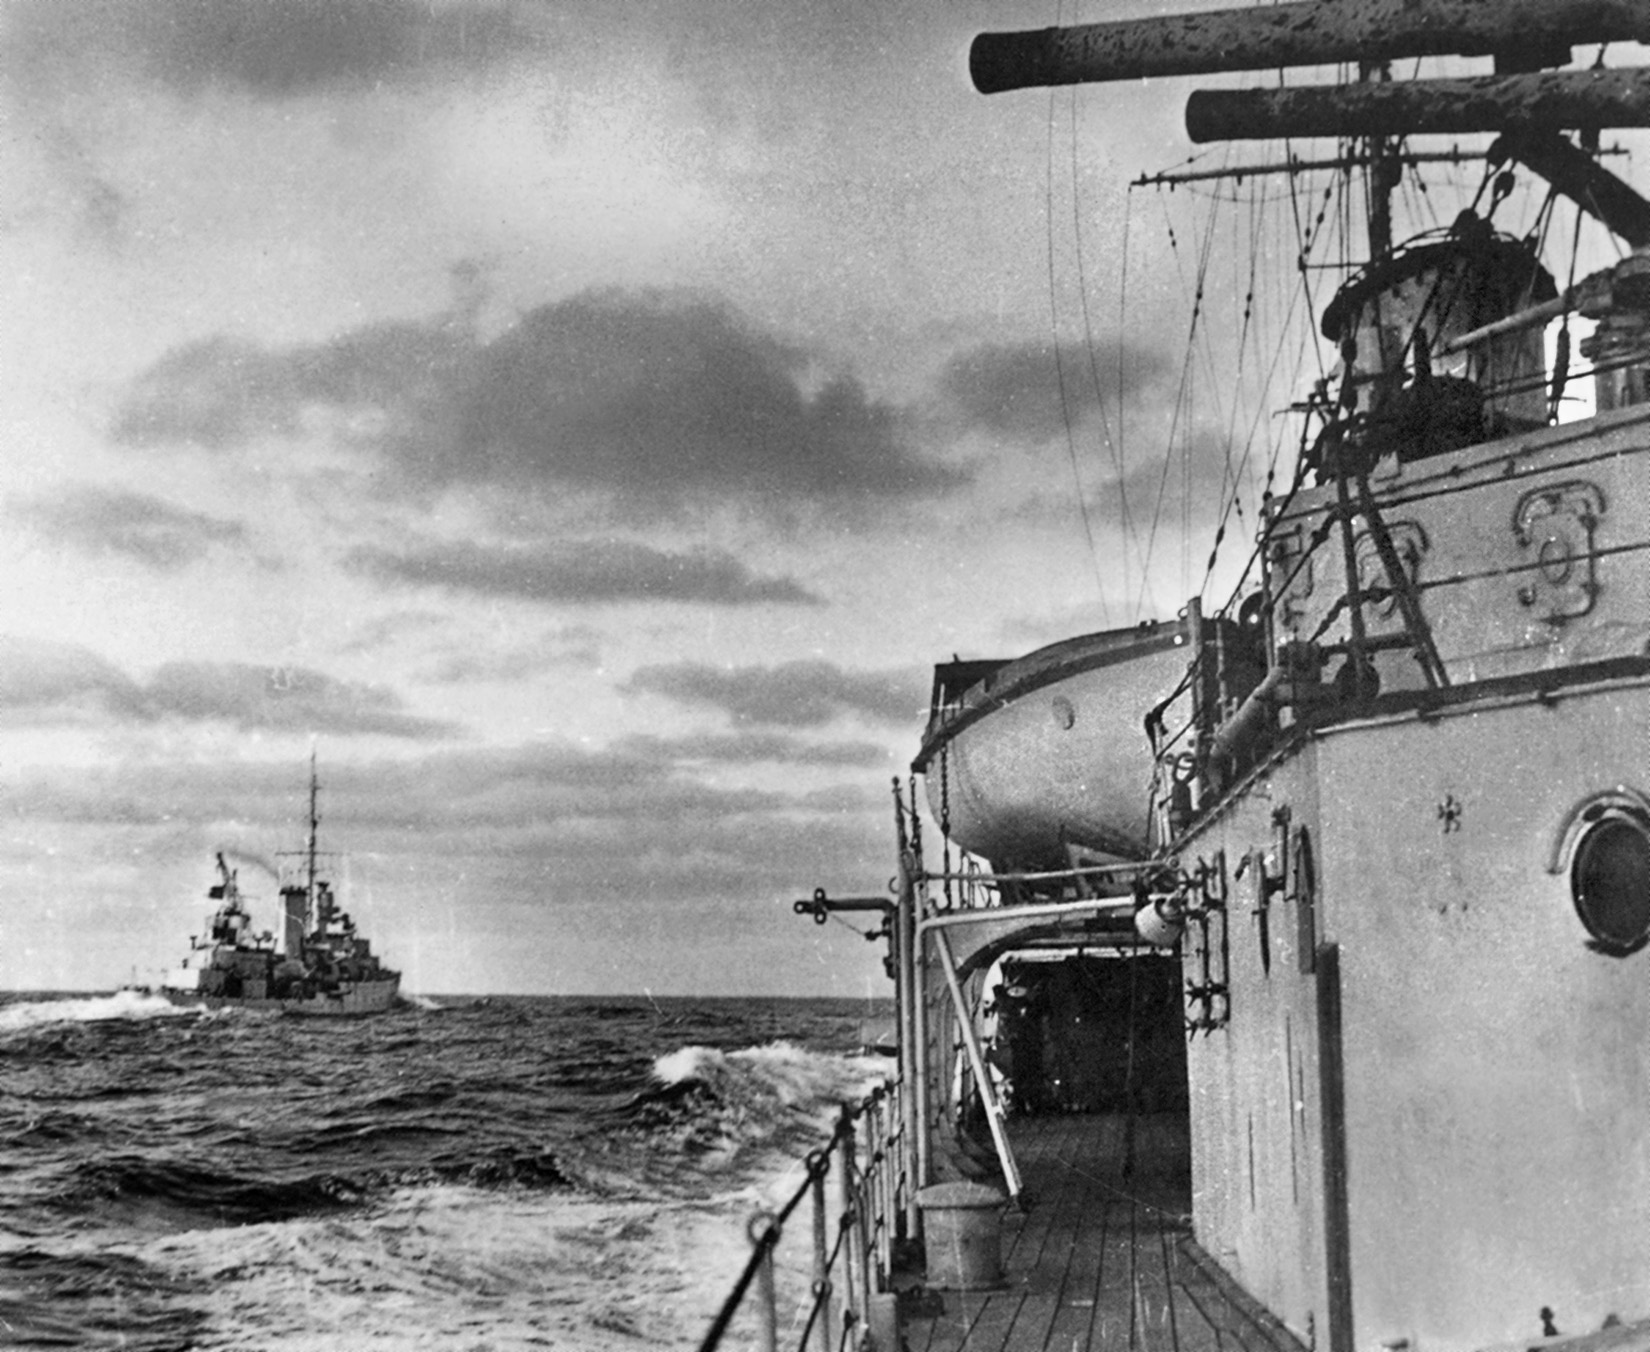 British cruisers patrol the sea lanes of the South Atlantic near the mouth of the River Plate during the early days of World War II.  